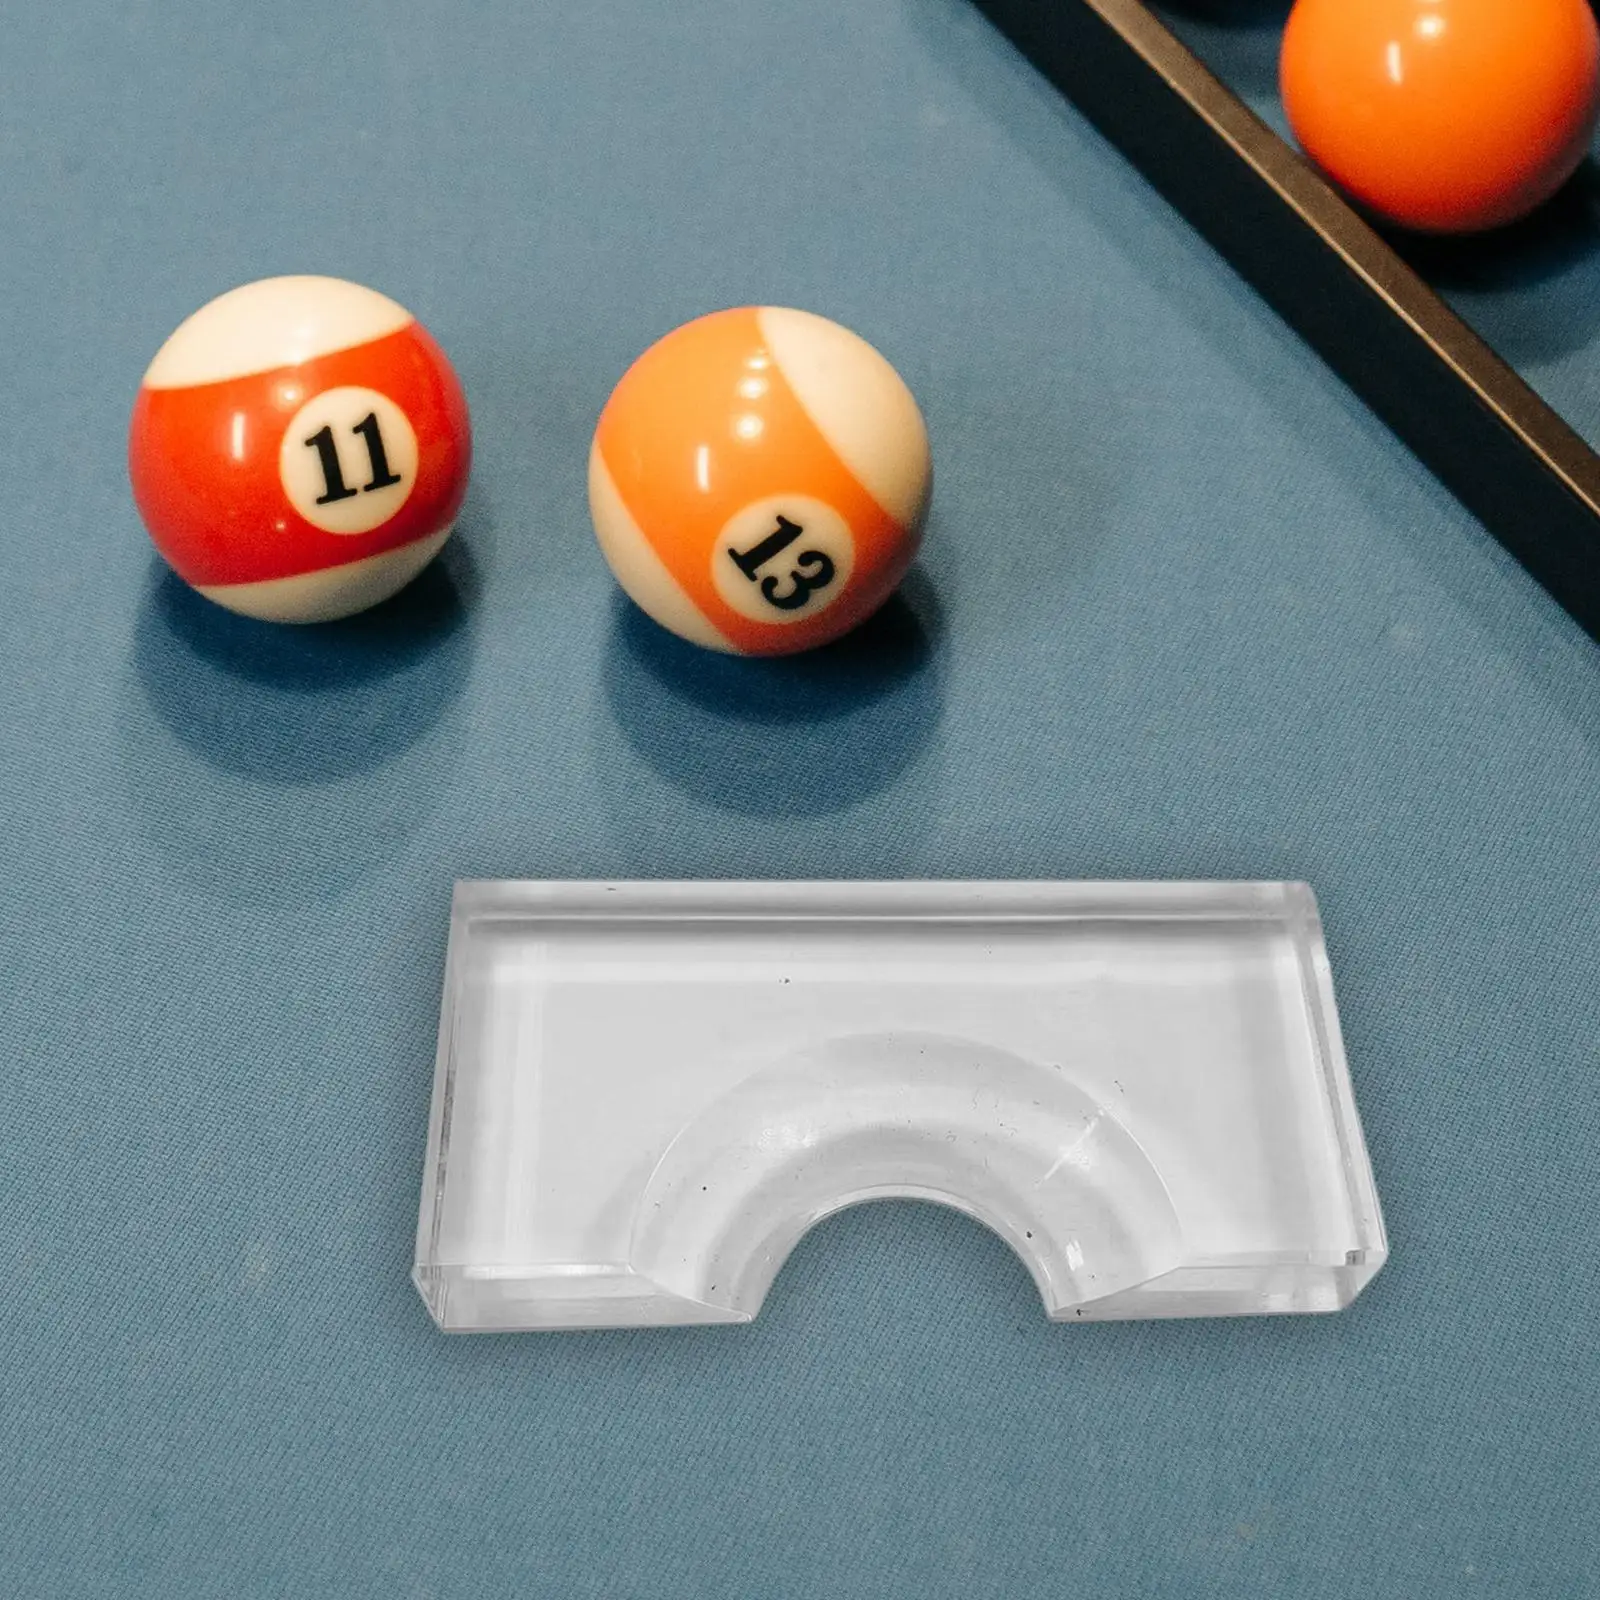 Acrylic Snooker Ball Holder Clear for Pool Ball Snooker Accessories Bars Pub